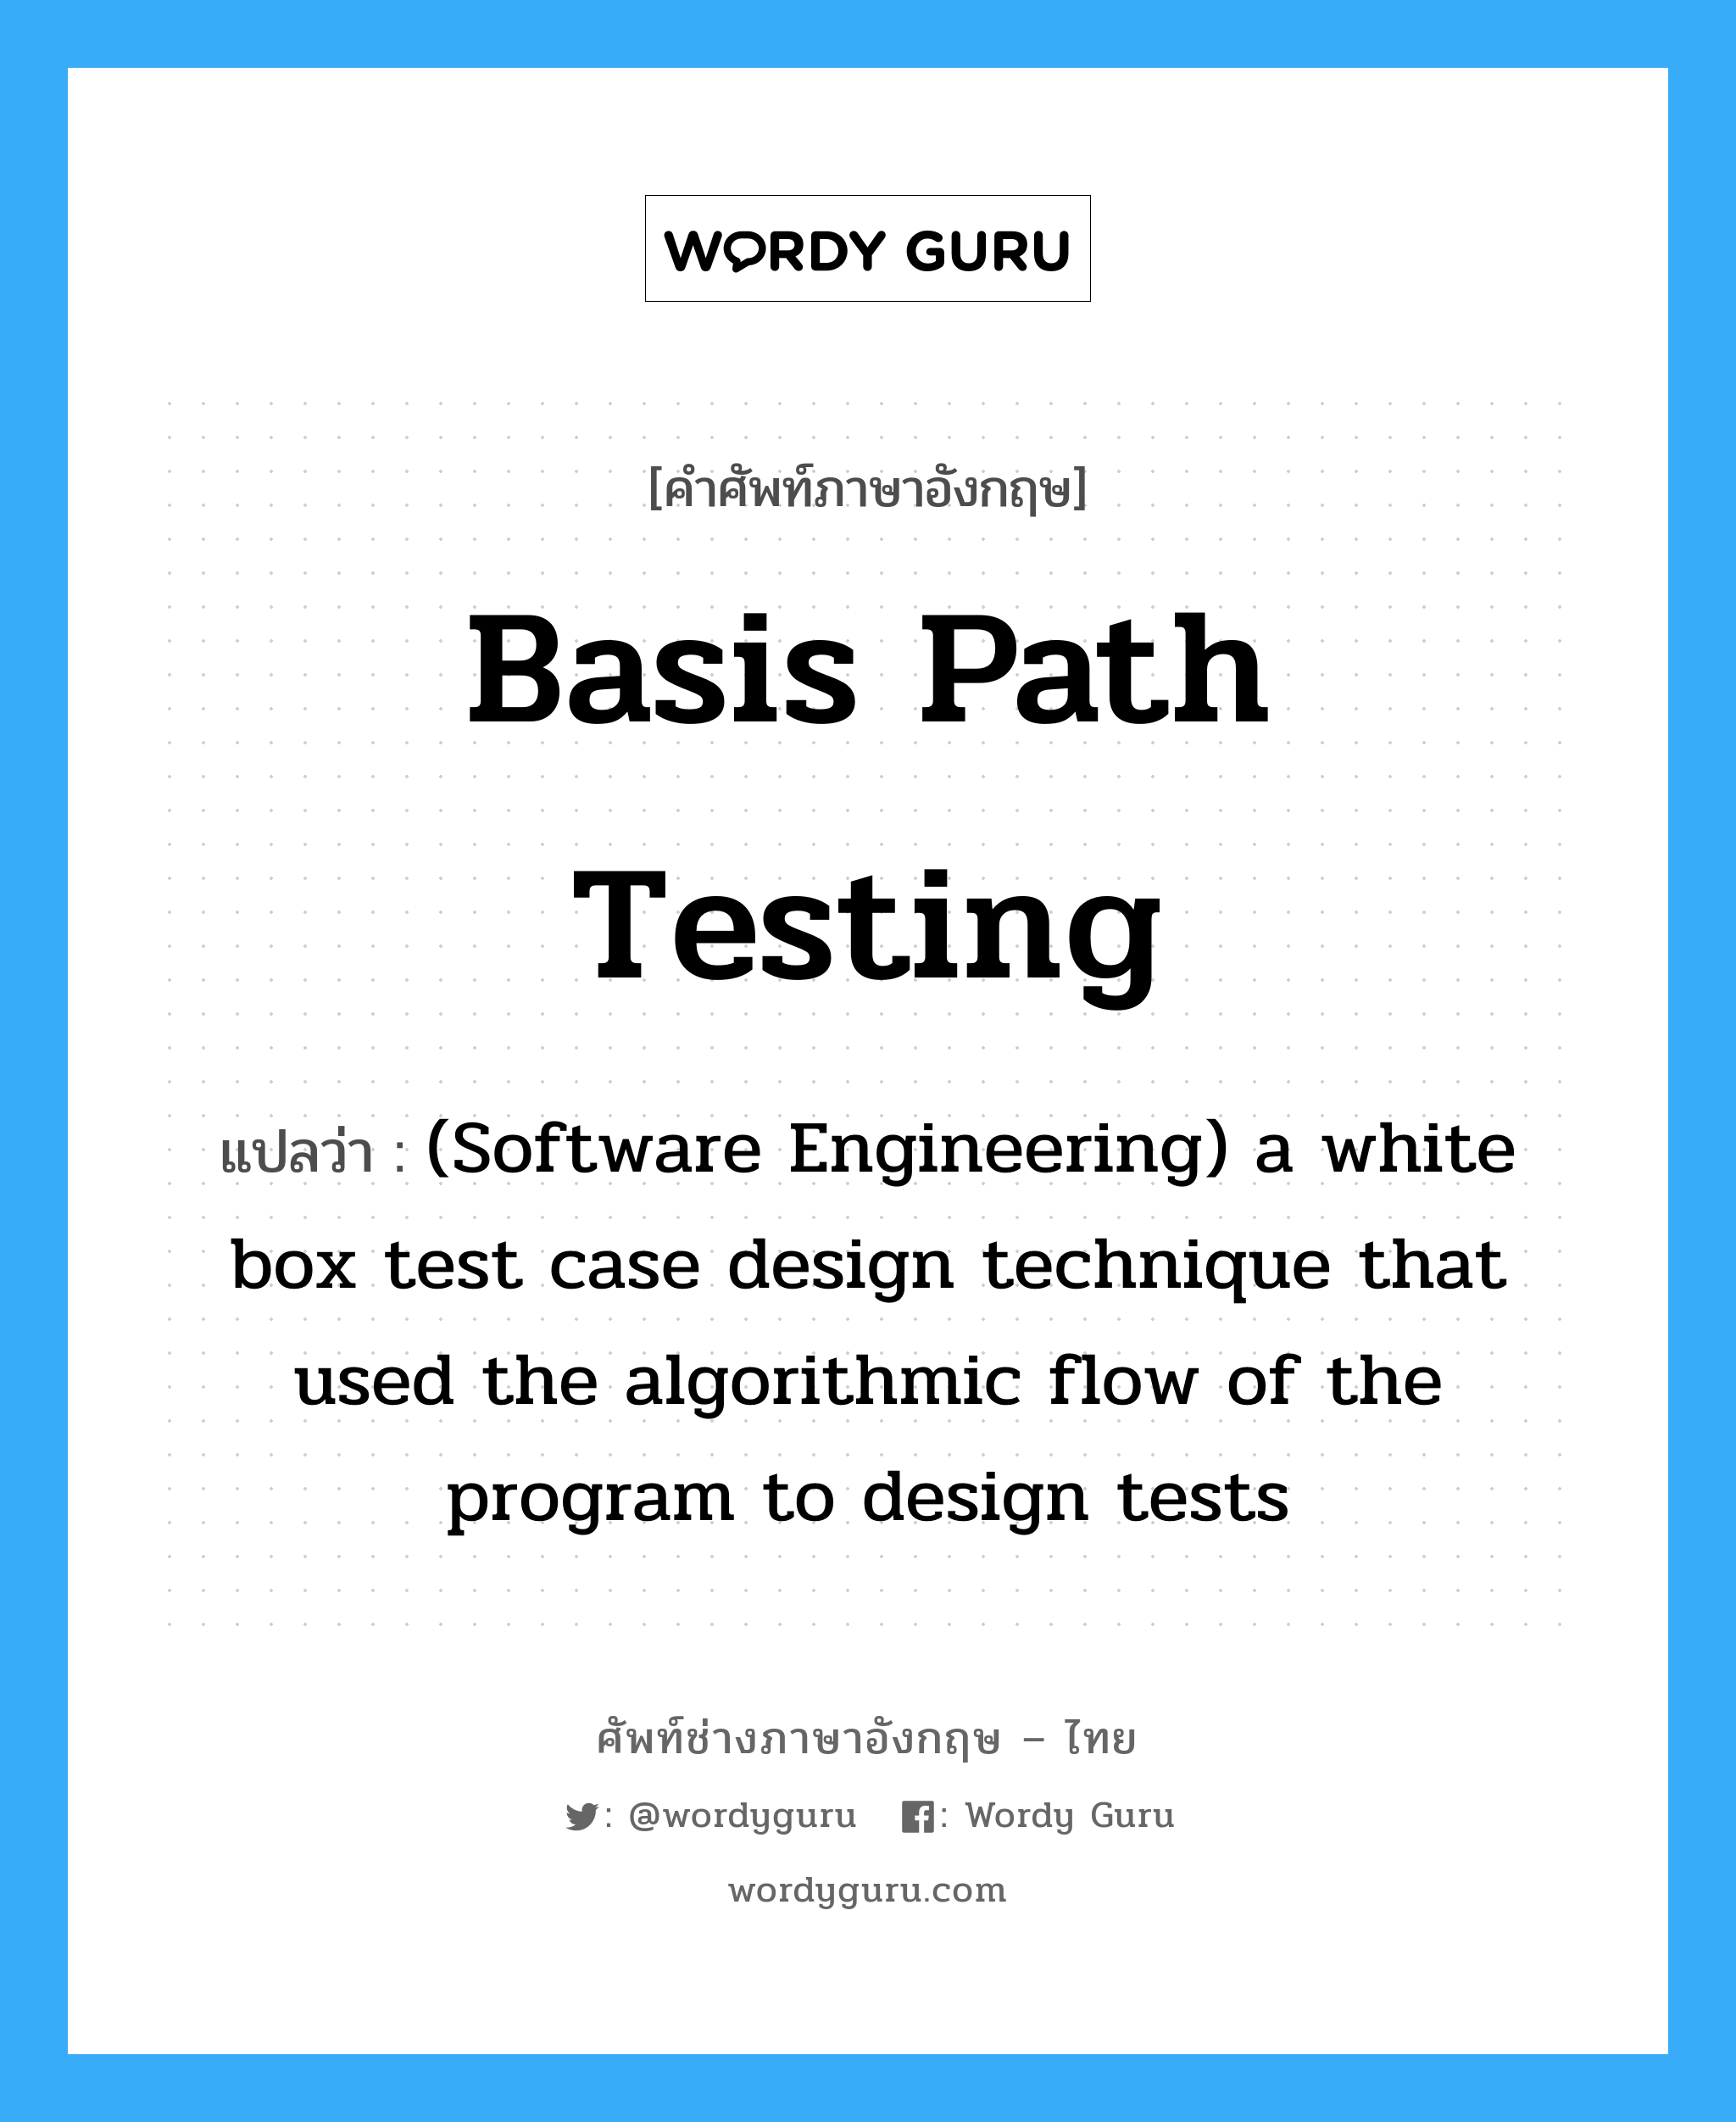 (Software Engineering) a white box test case design technique that used the algorithmic flow of the program to design tests ภาษาอังกฤษ?, คำศัพท์ช่างภาษาอังกฤษ - ไทย (Software Engineering) a white box test case design technique that used the algorithmic flow of the program to design tests คำศัพท์ภาษาอังกฤษ (Software Engineering) a white box test case design technique that used the algorithmic flow of the program to design tests แปลว่า Basis path testing